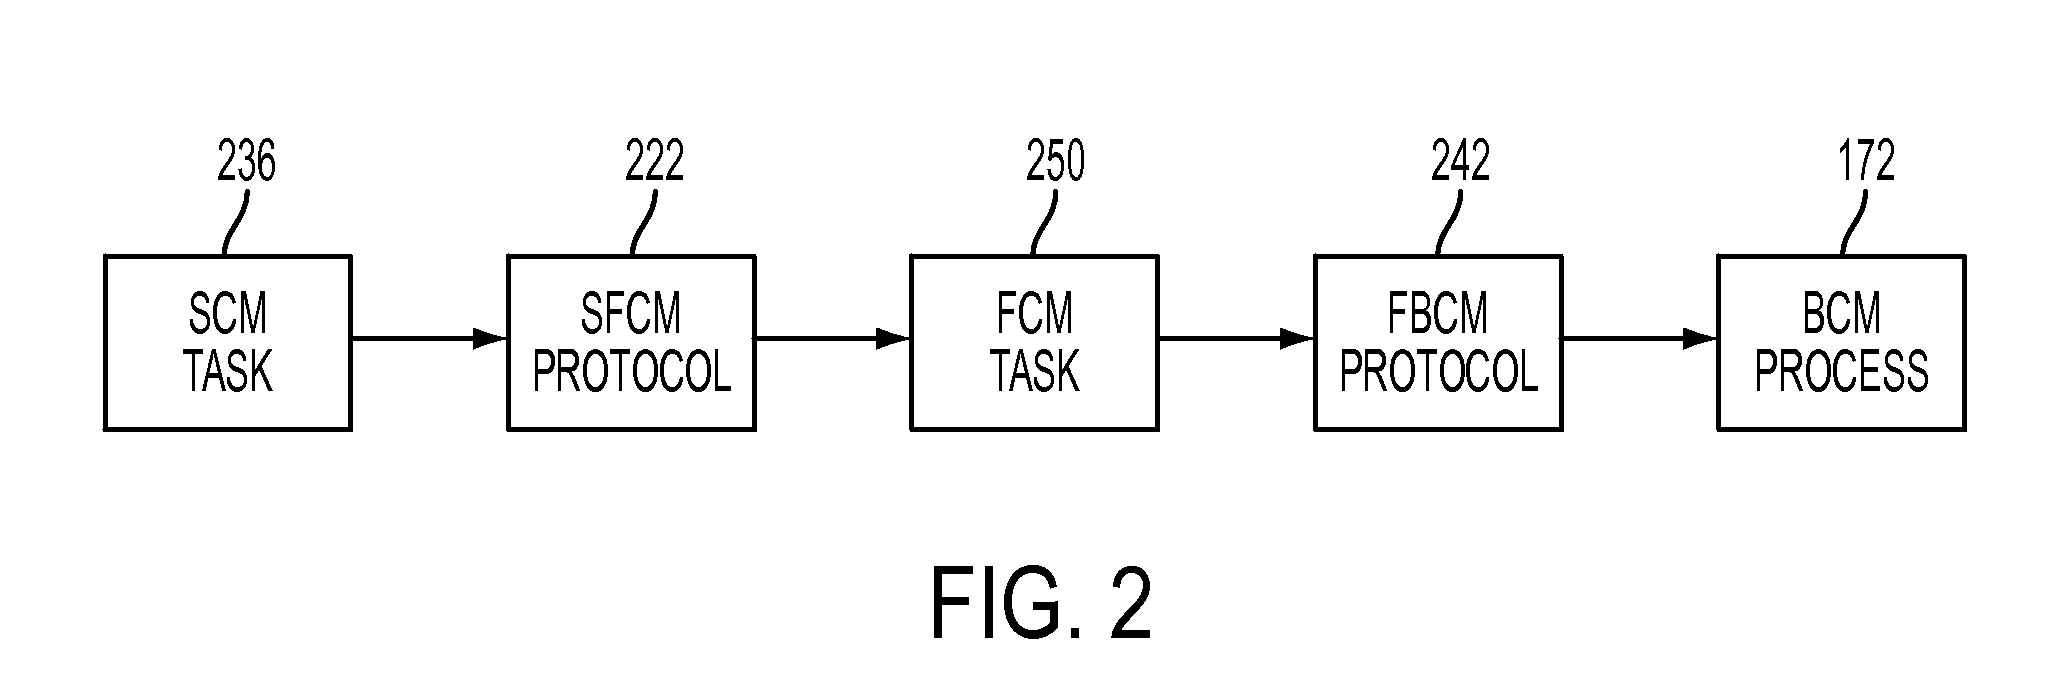 System and method for reliable and scalable health monitoring